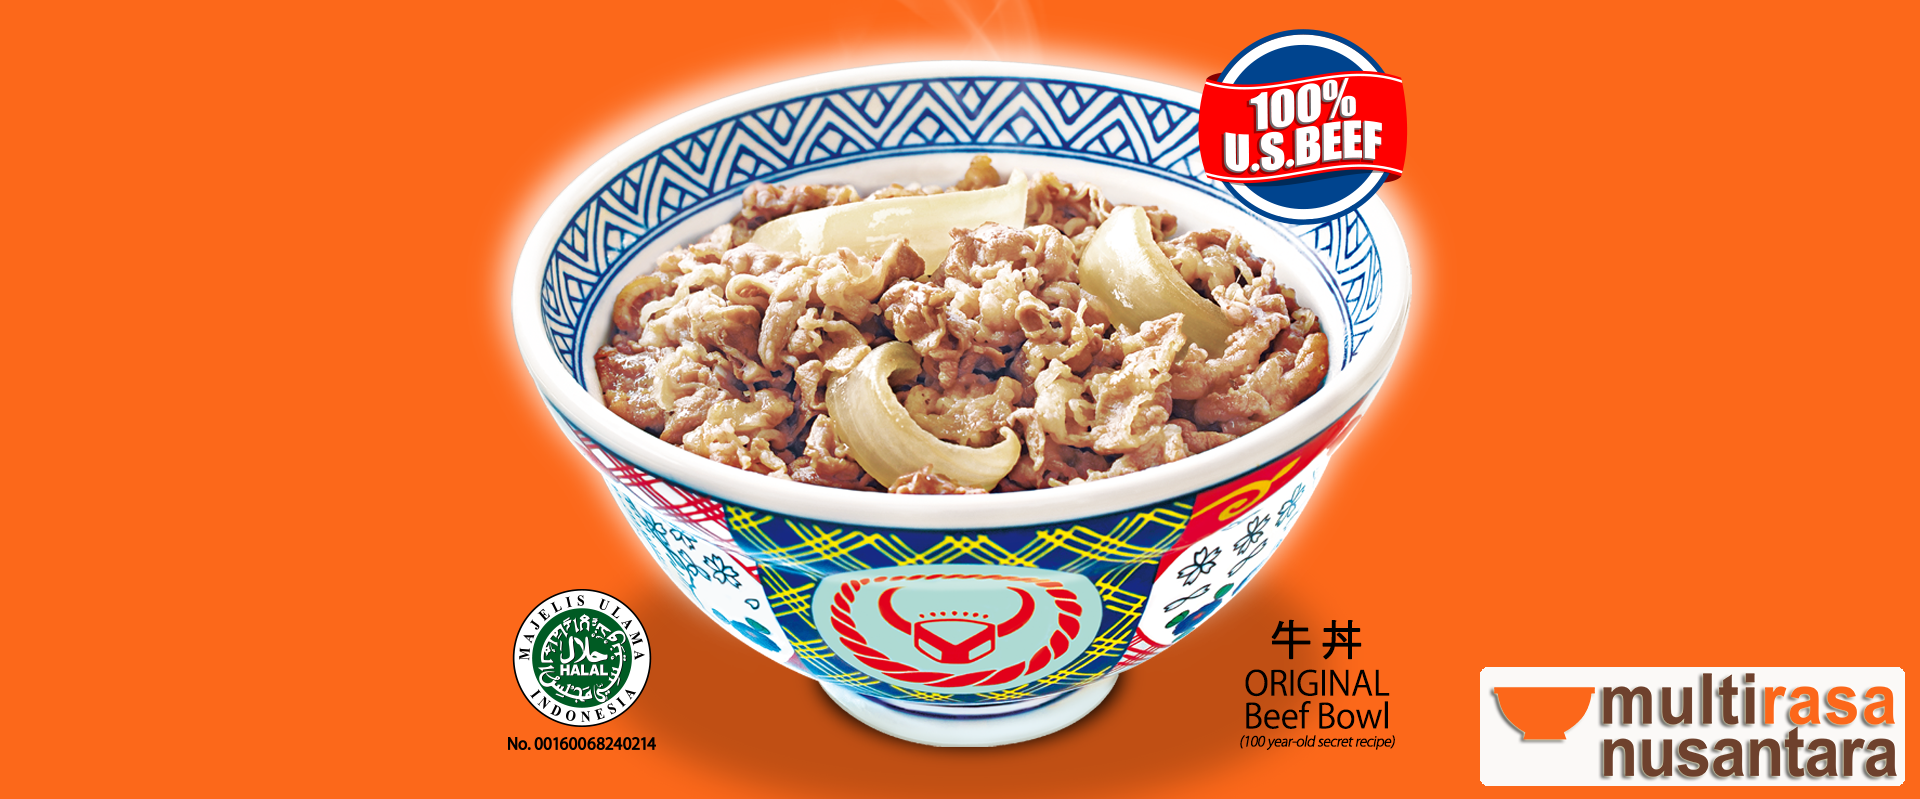 Japan�s No. 1 Beef Bowl since 1899, Tokyo - Japan, Now in Indonesia.